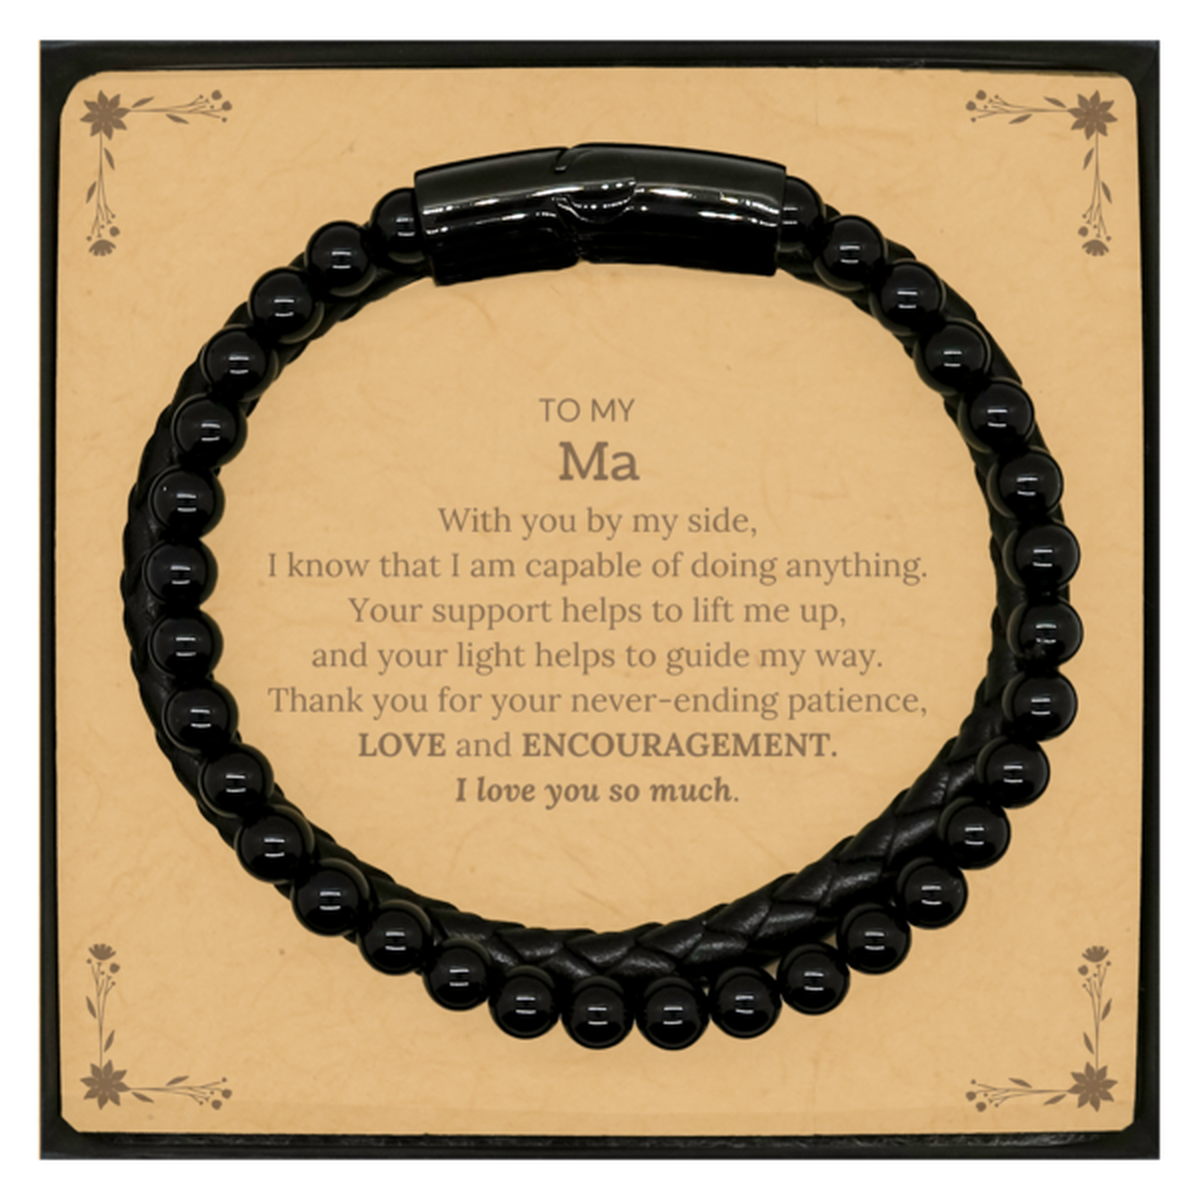 Appreciation Ma Stone Leather Bracelets Gifts, To My Ma Birthday Christmas Wedding Keepsake Gifts for Ma With you by my side, I know that I am capable of doing anything. I love you so much